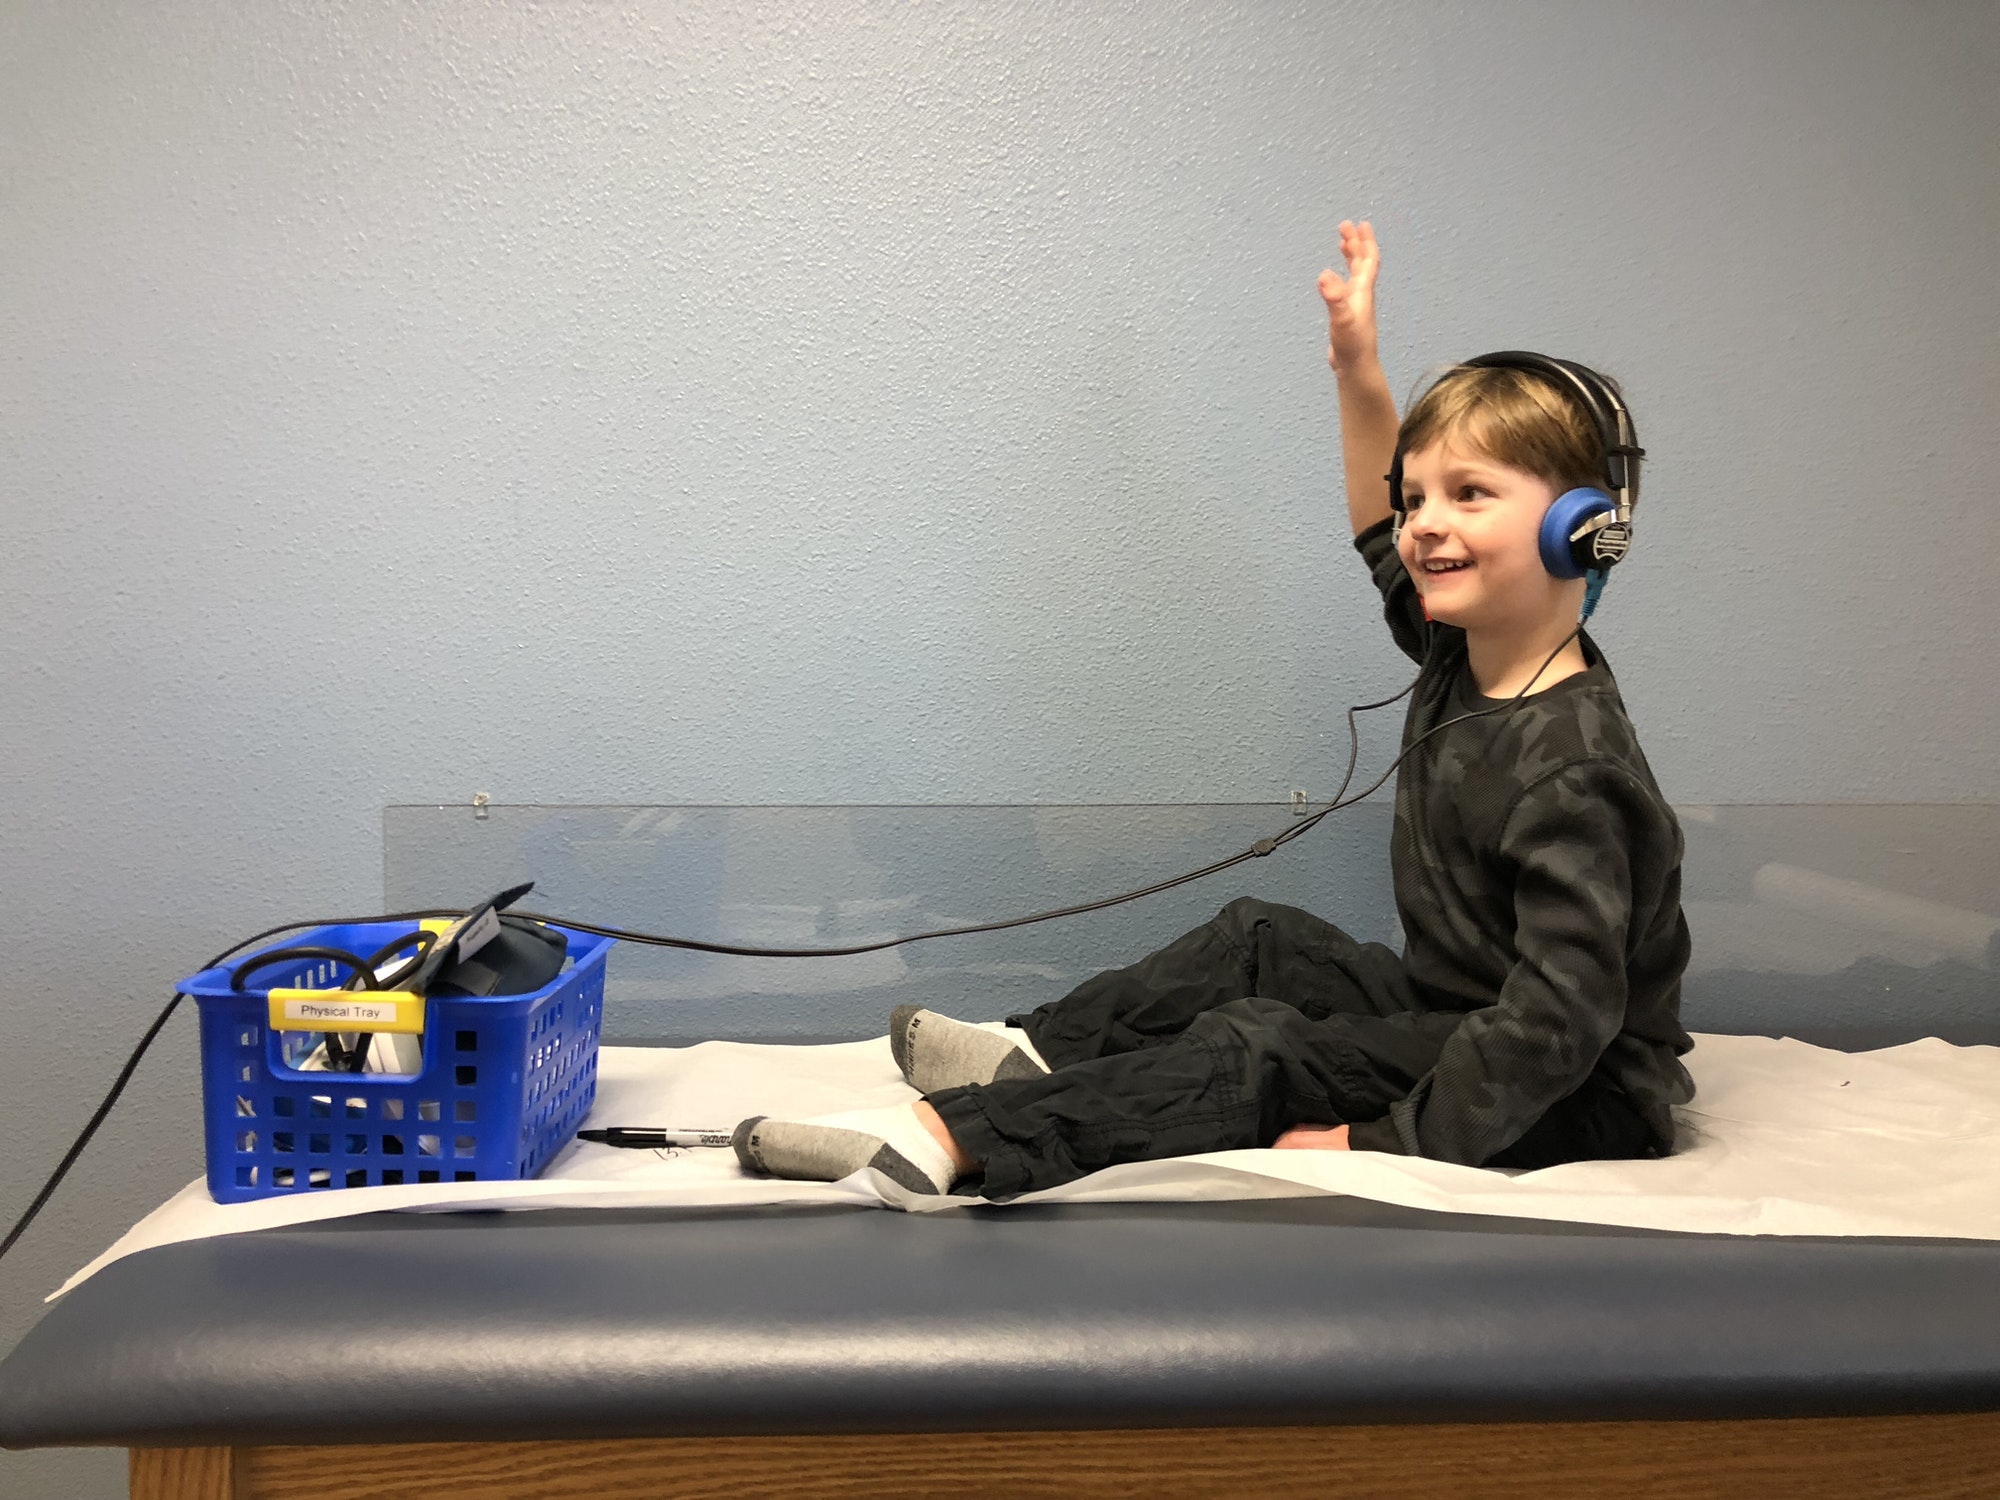 Hearing test at the doctor